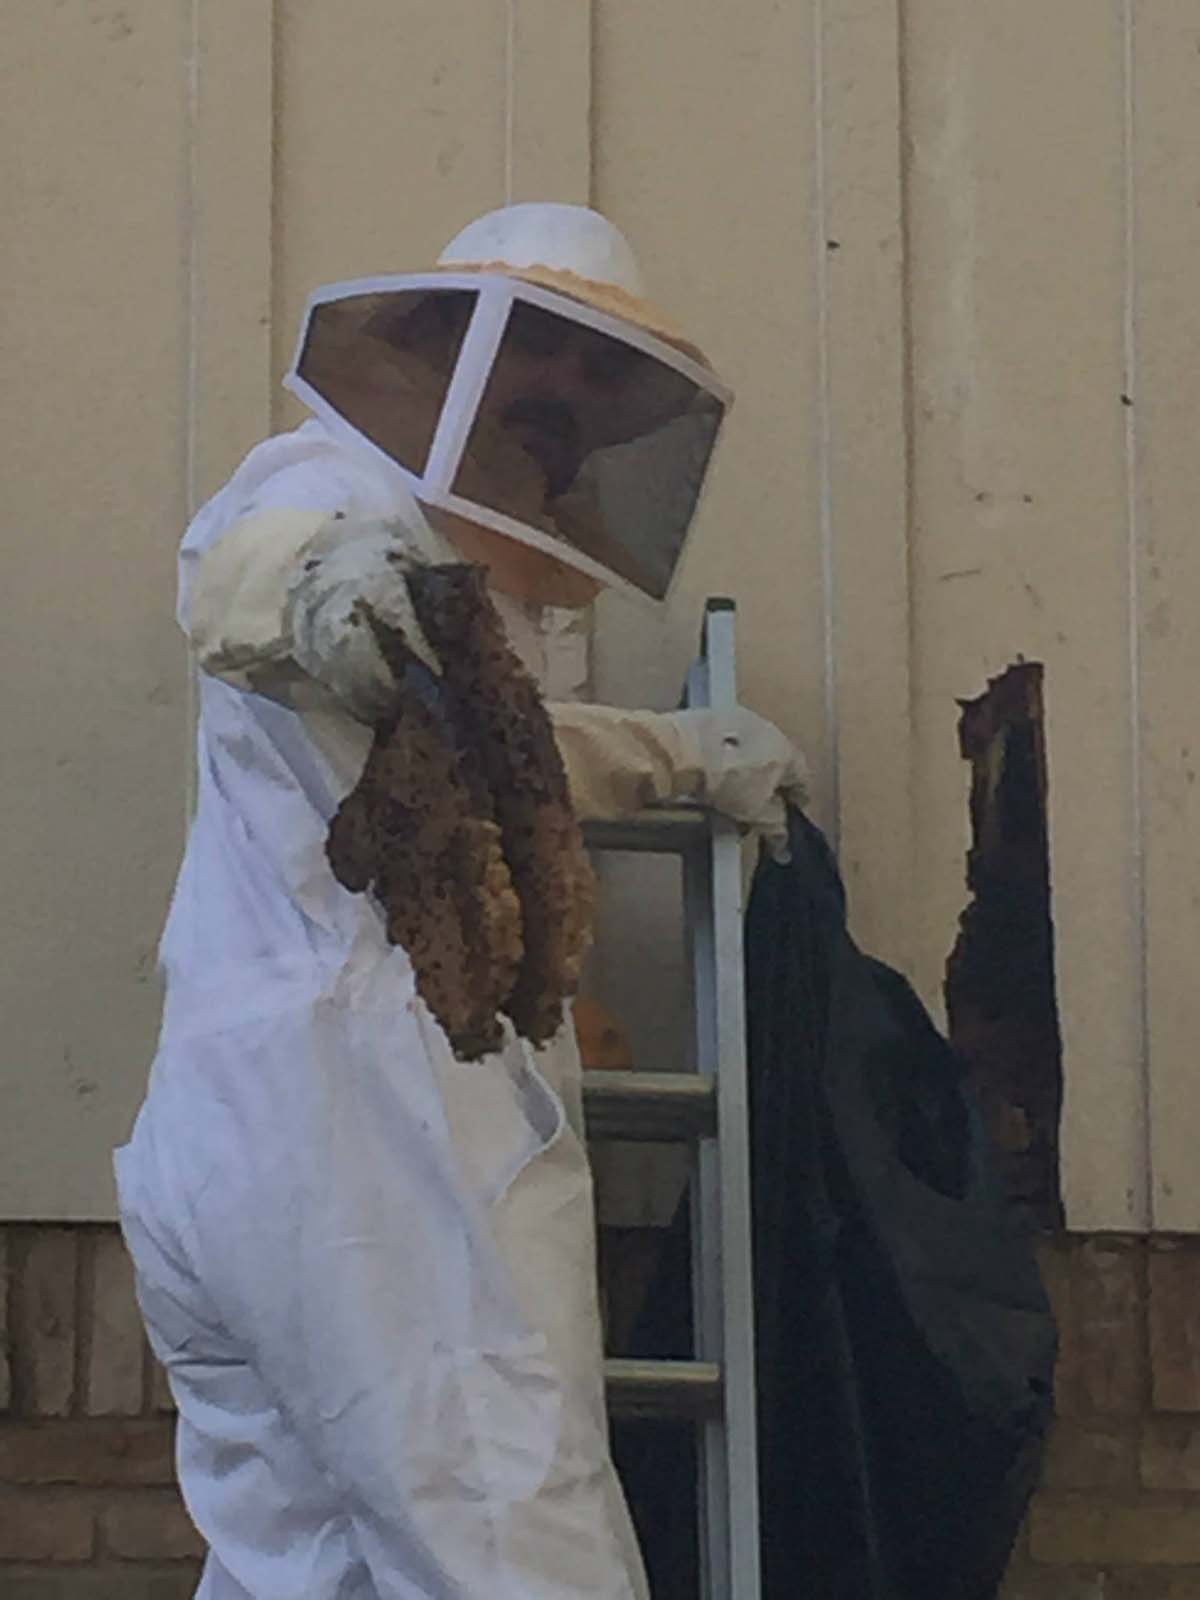 Bee hive removal from house in McKinney Texas - This bee hive was inside the house. 